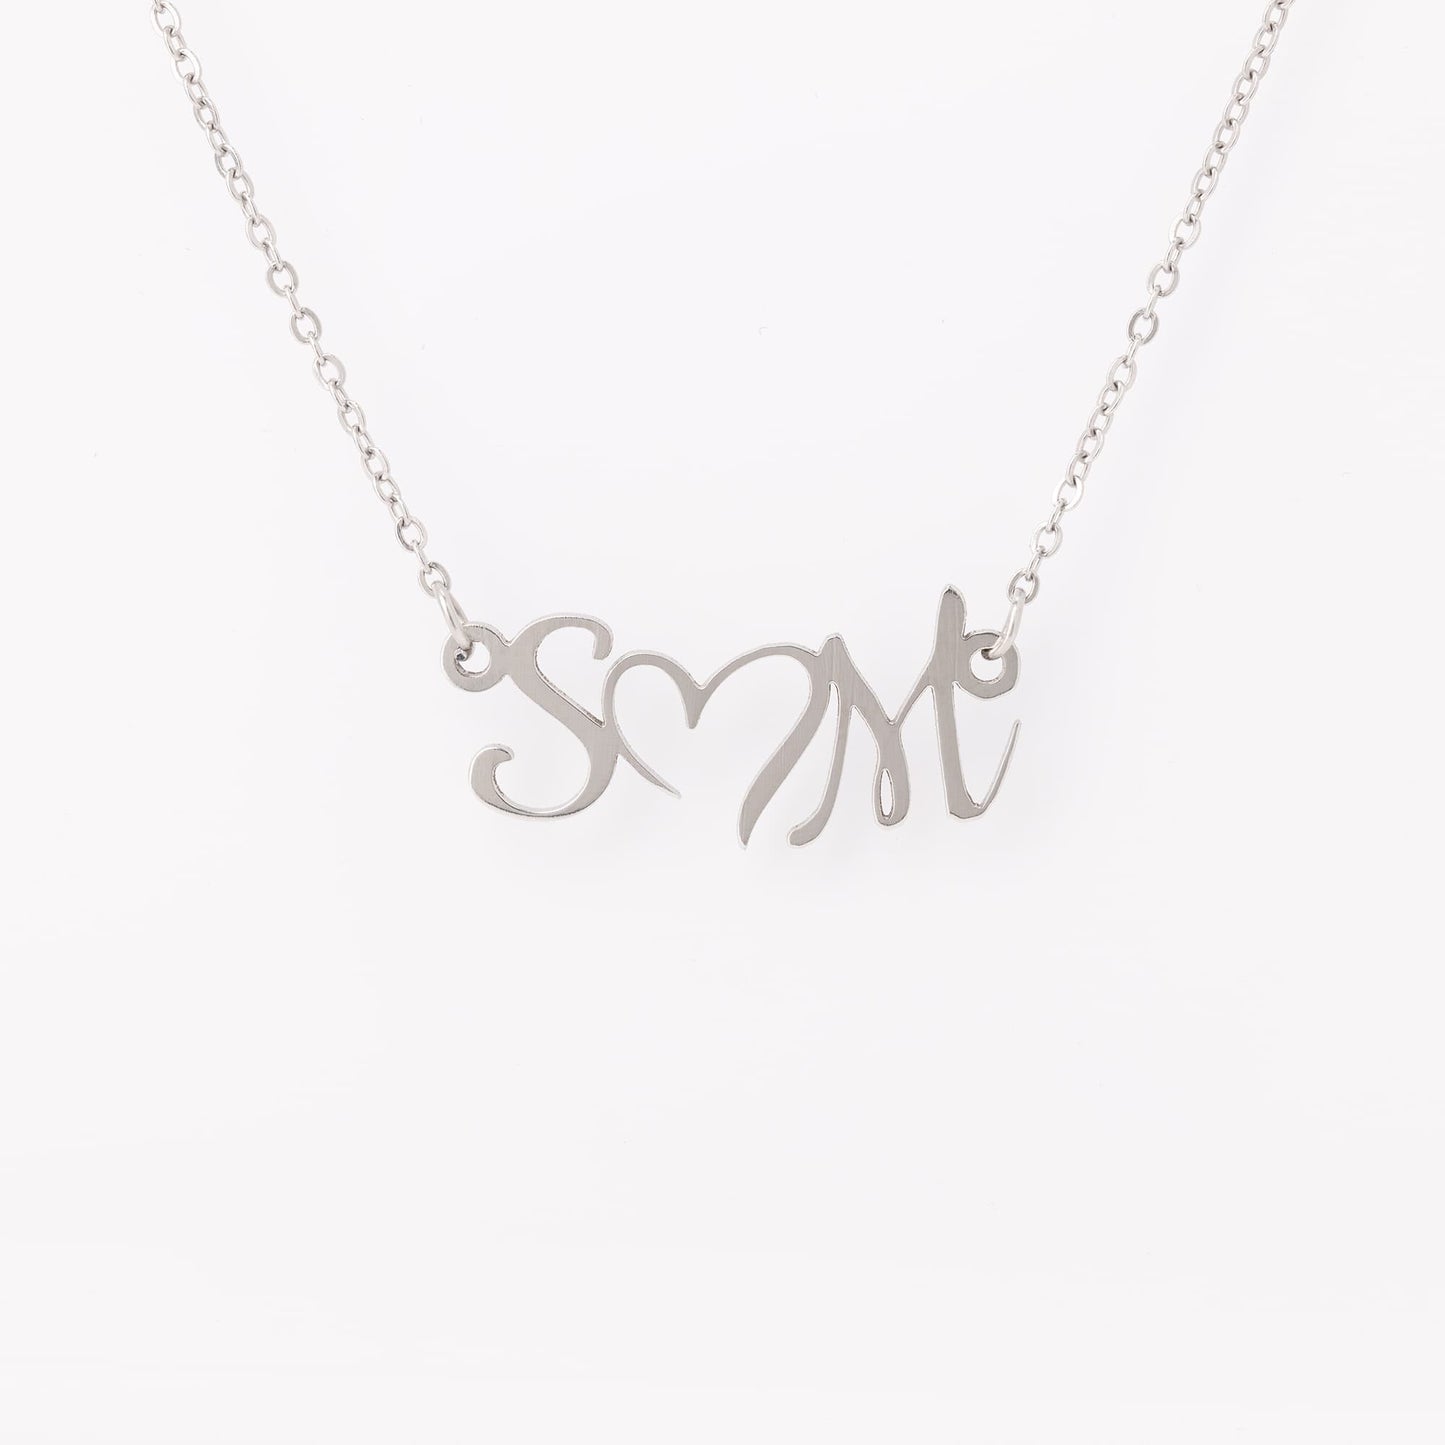 Personalized Necklace with Double Initial Heart Pendant, Personalized Gift for Any Occasion, Ecofriendly